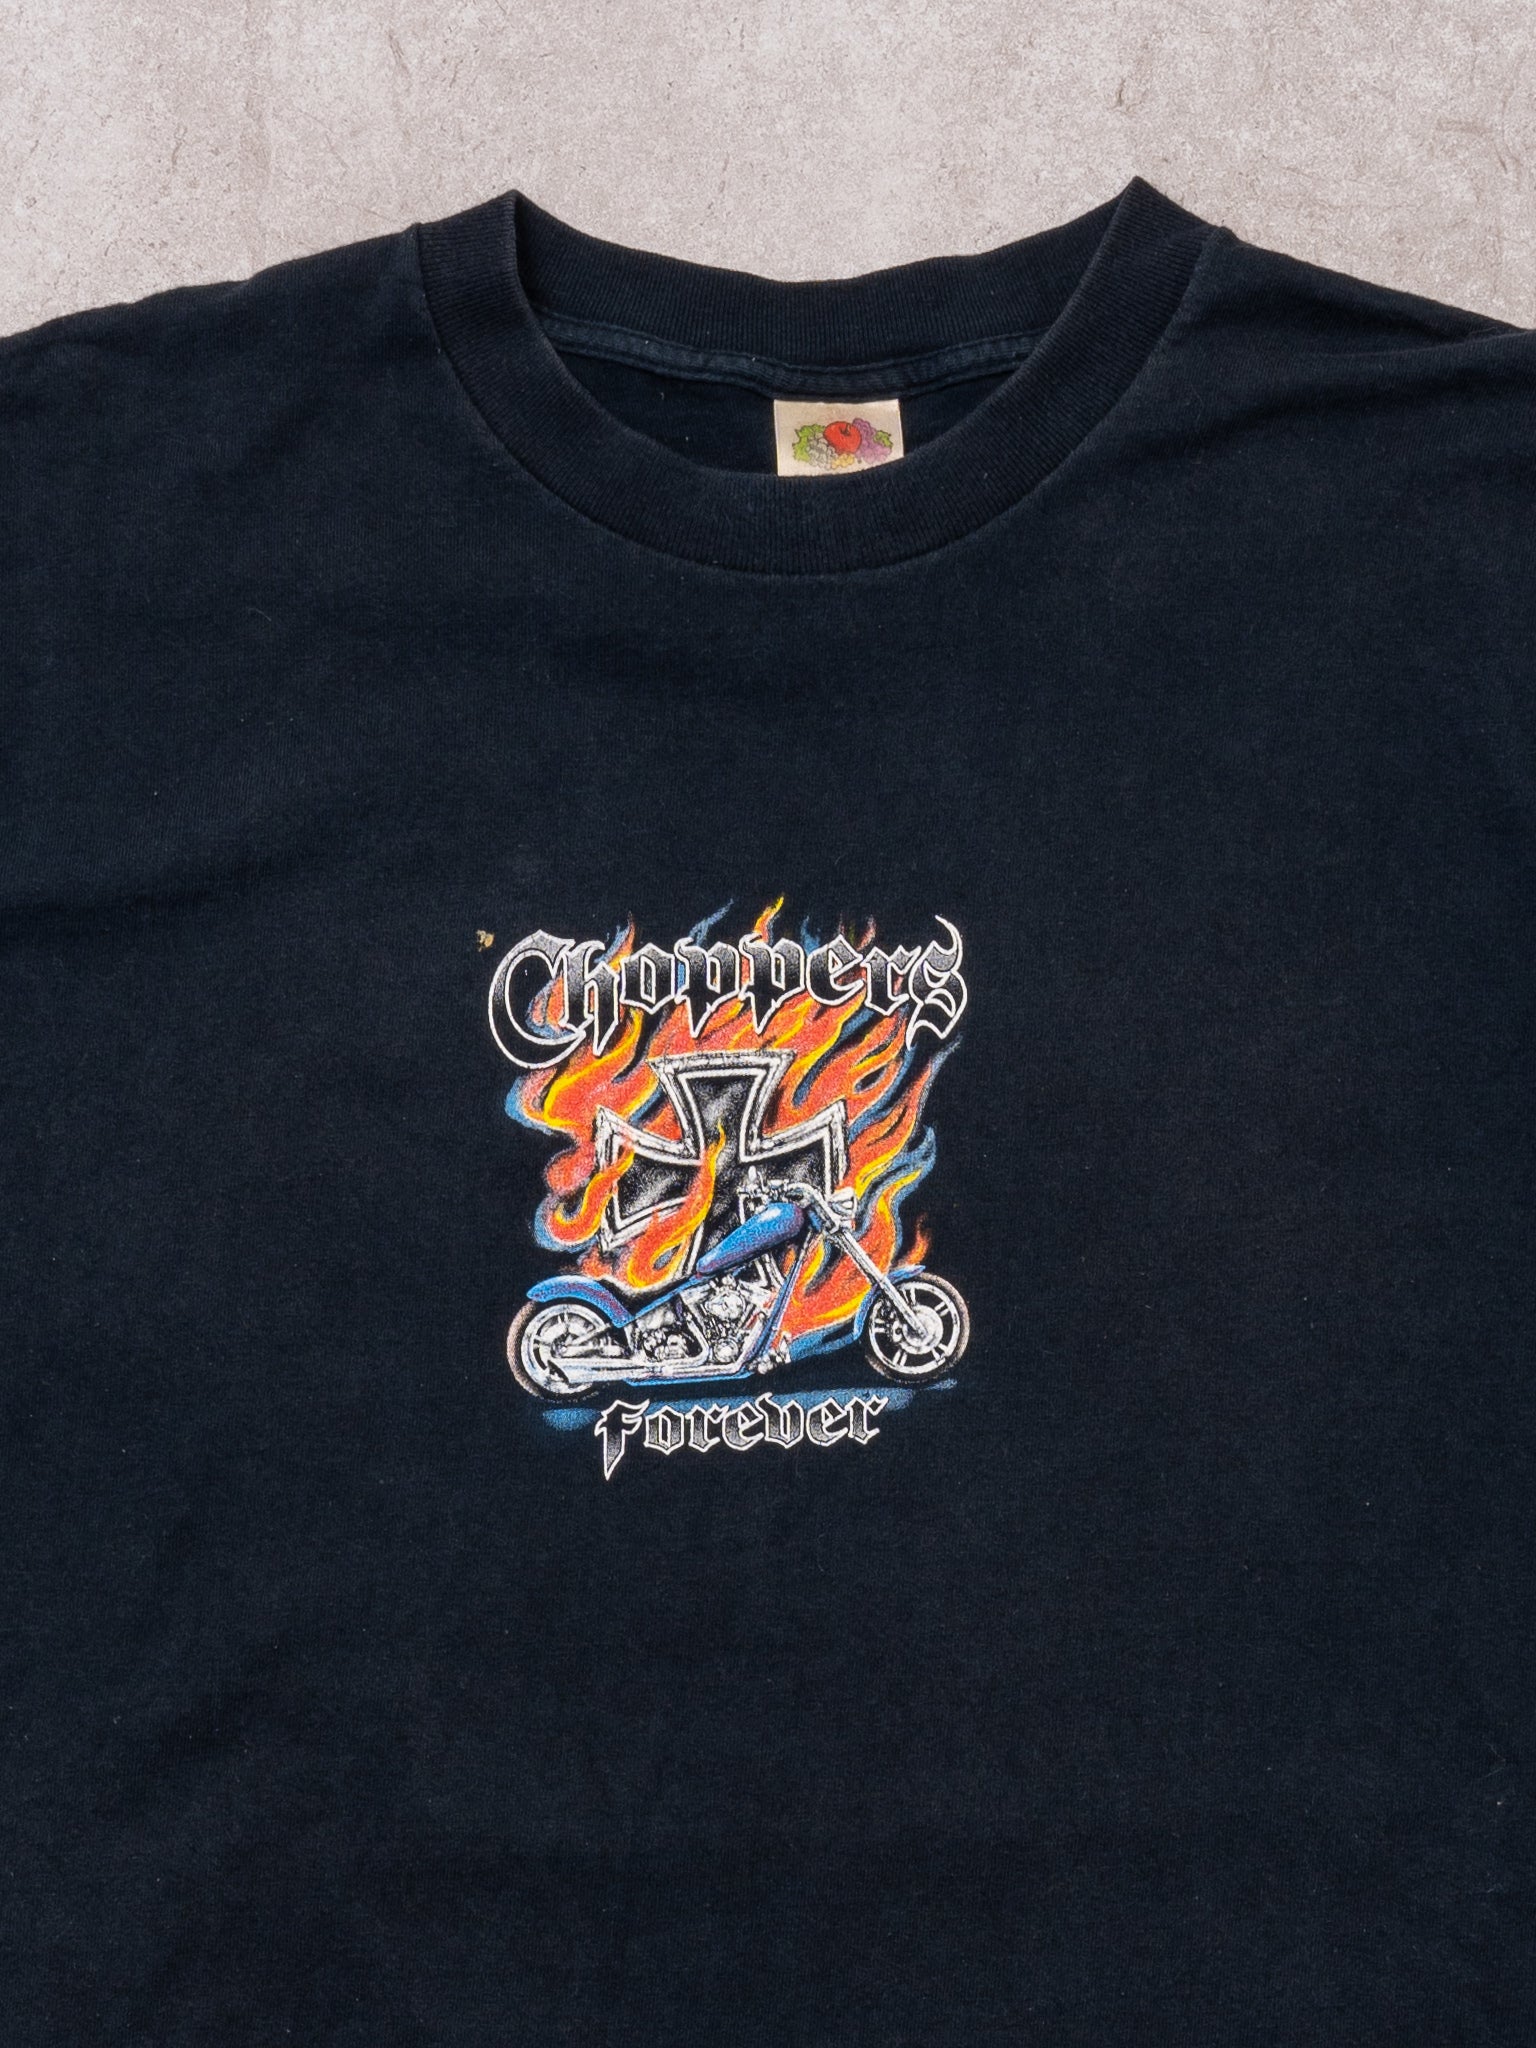 Vintage Black Choppers Forever Flame Tee (L)